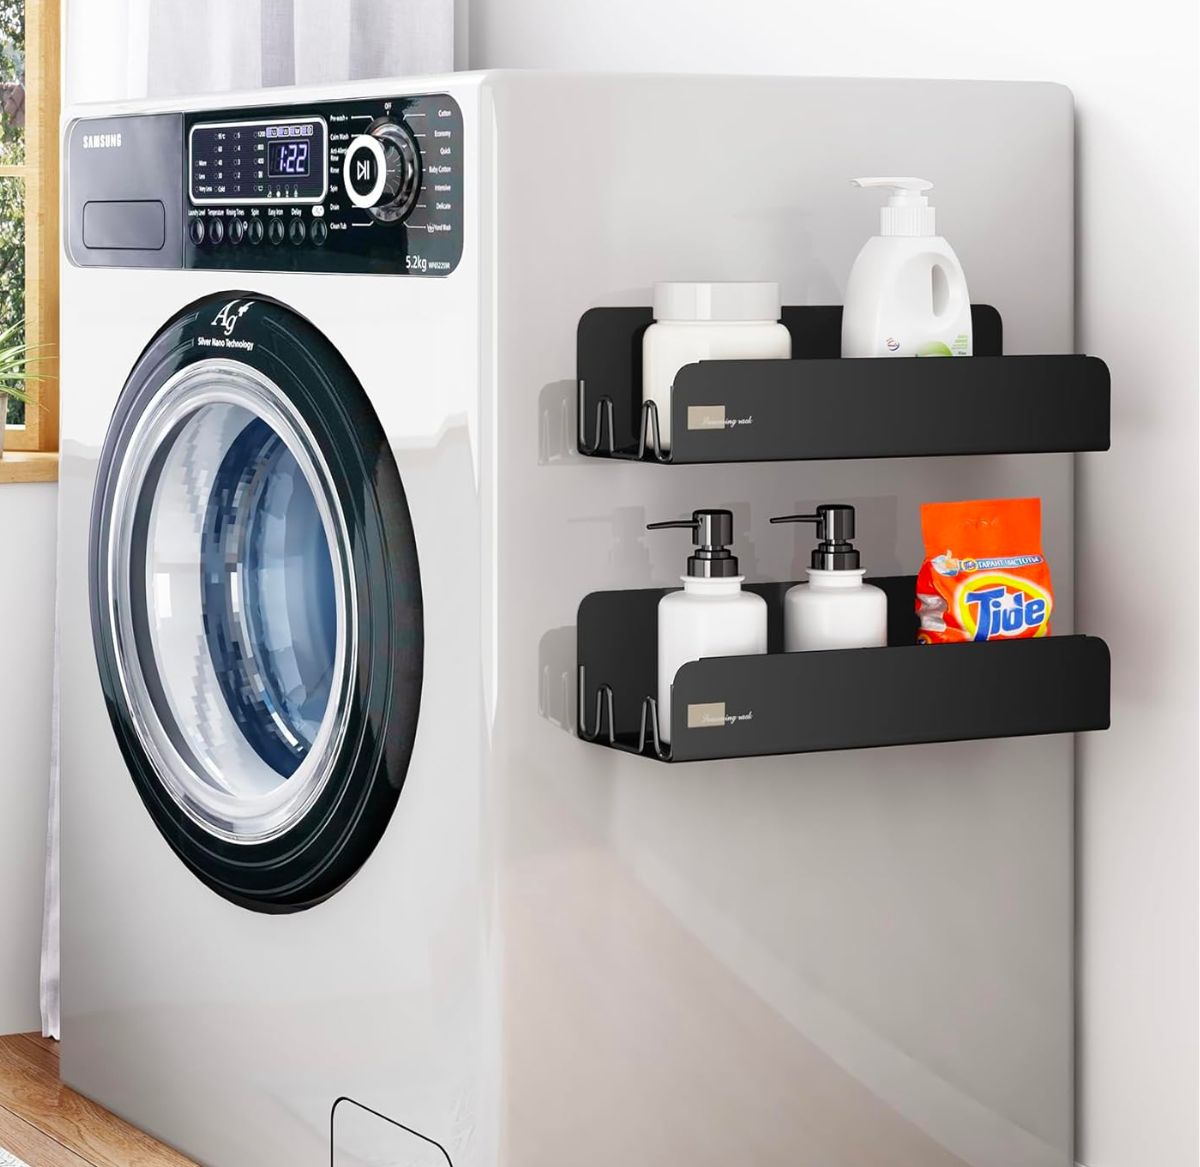 2 large magnetic shelves on the side of a frontload washing machine